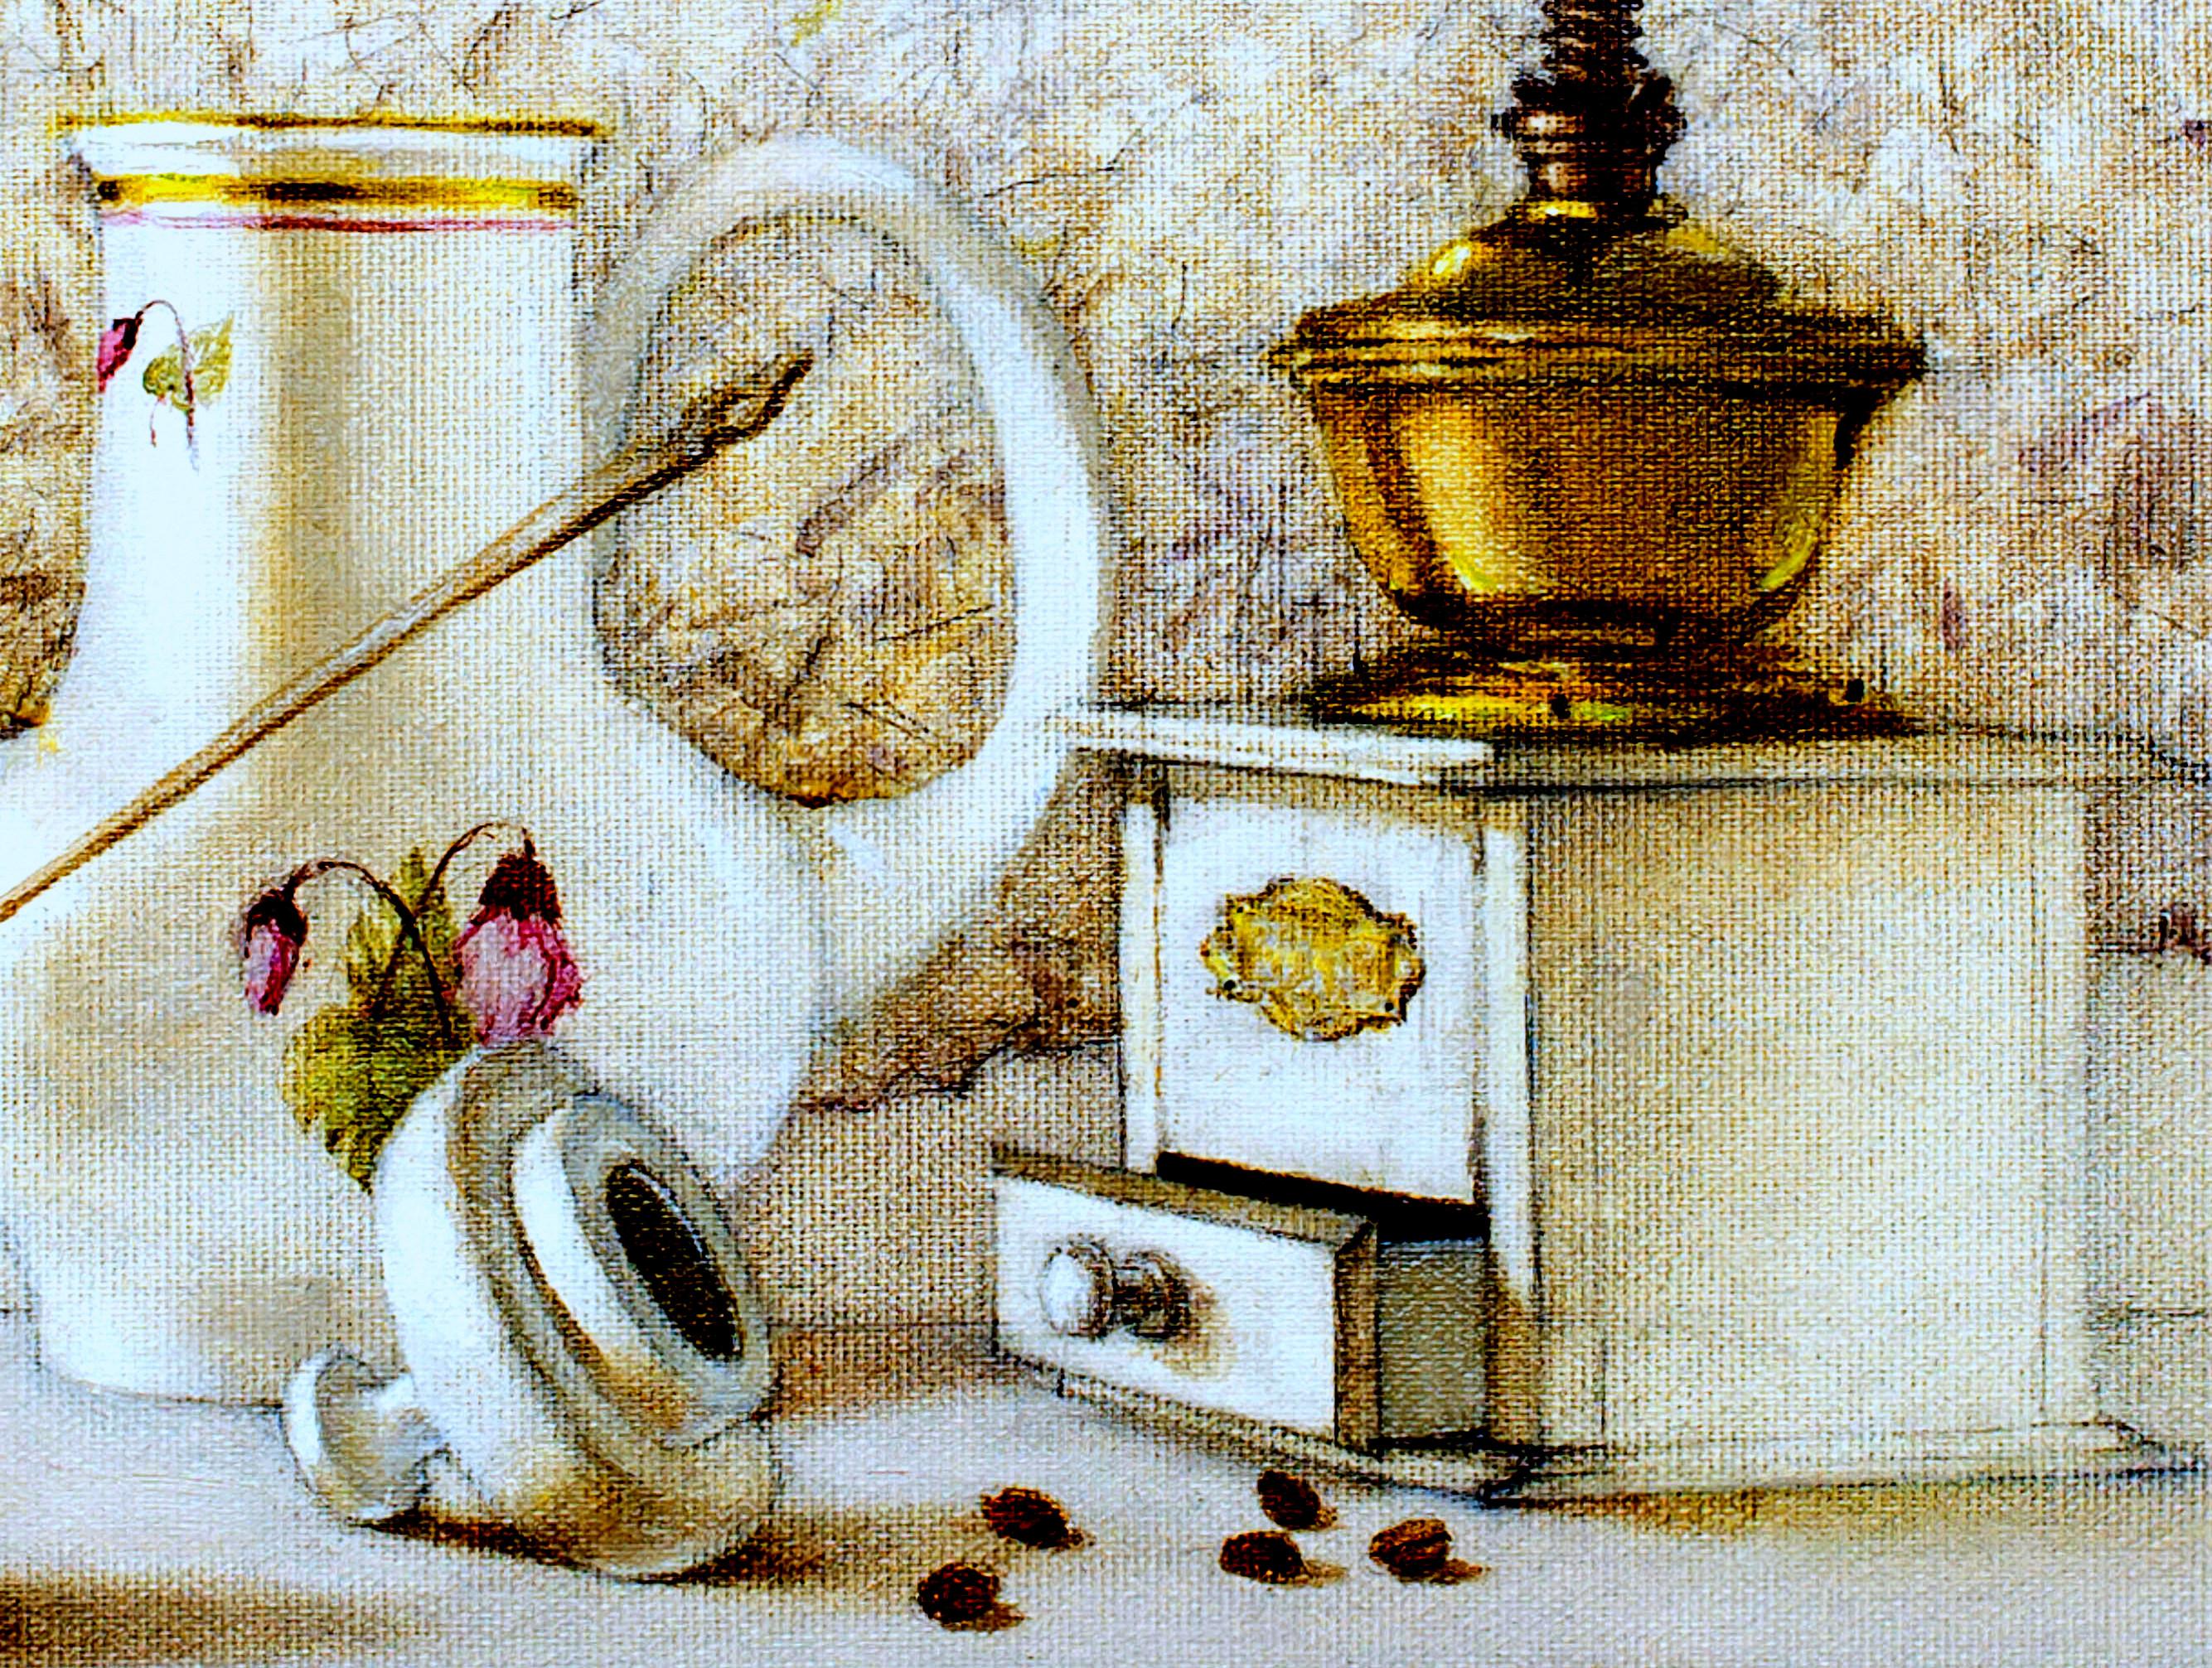 Still Life with Coffee-Beans. 2011. Oil on linen, 45X50 cm - Romantic Painting by Tatyana Palchuk